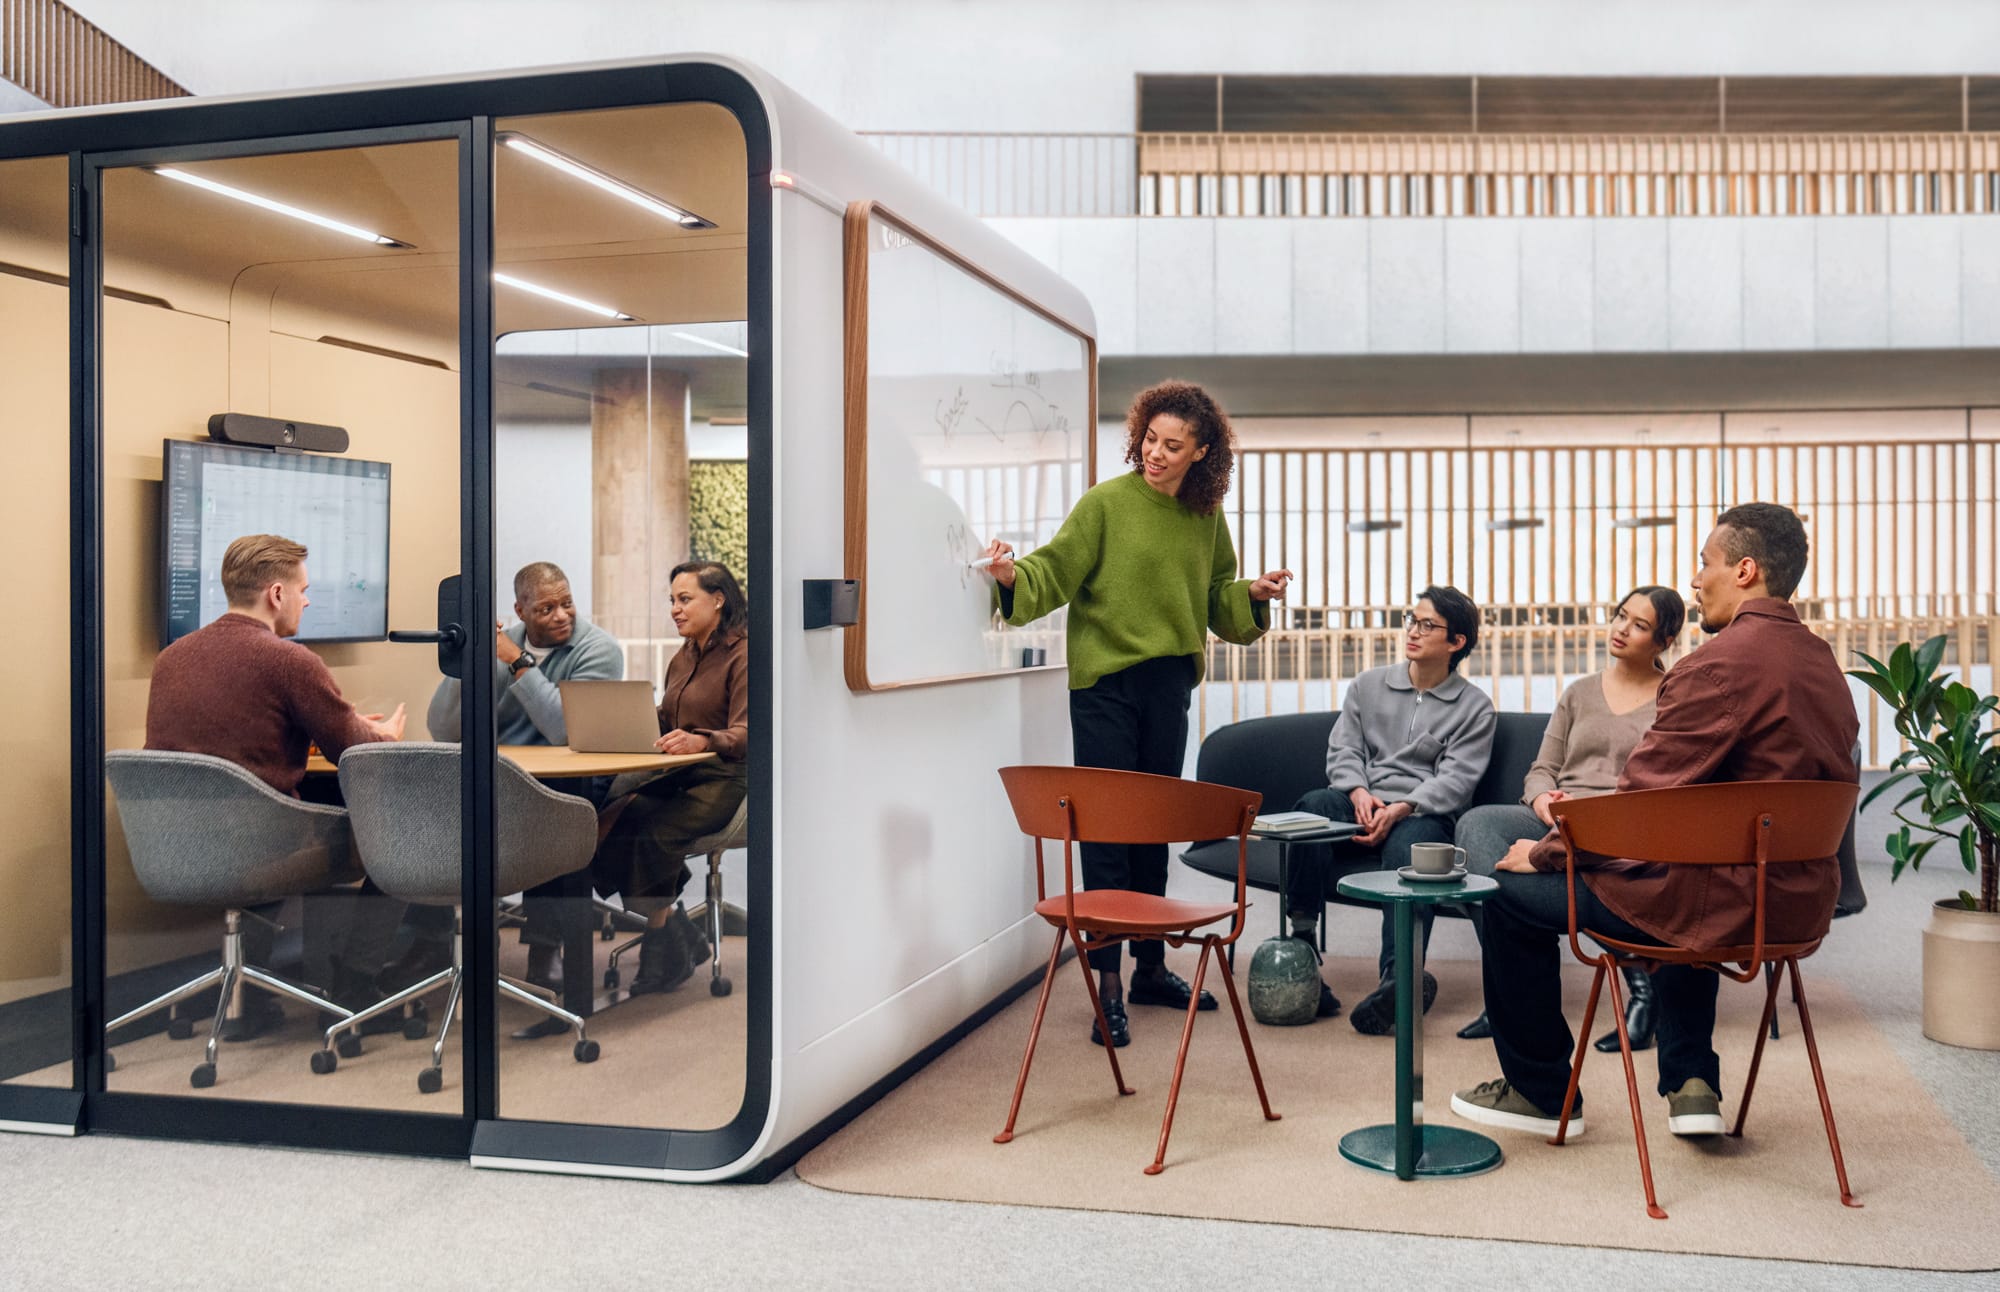 Framery Smart Pod. Copyright of Framery. Lady writing on a white board on the outside wall of a work pod. Three individuals having a meeting inside the white work pod. 